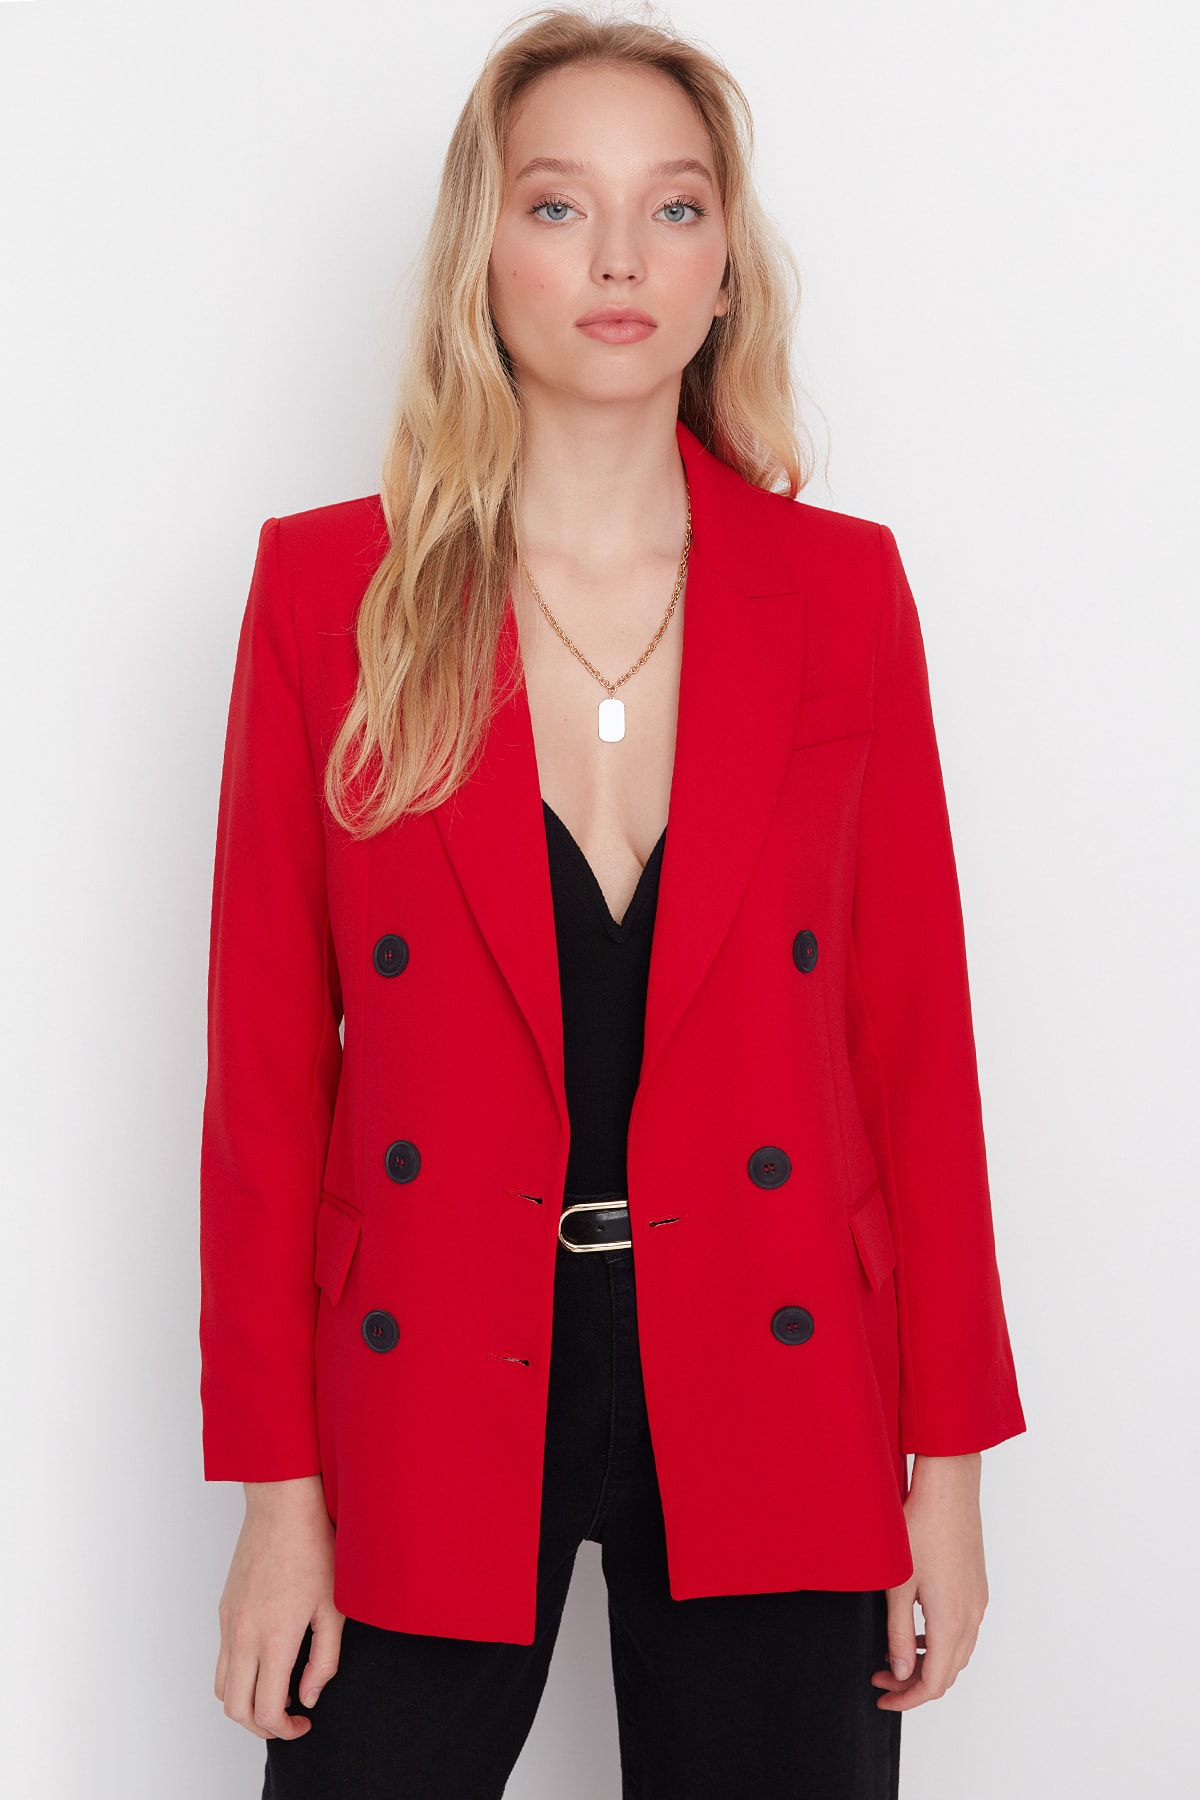 Trendyol Red Woven Lined Double Breasted Closure Blazer Jacket